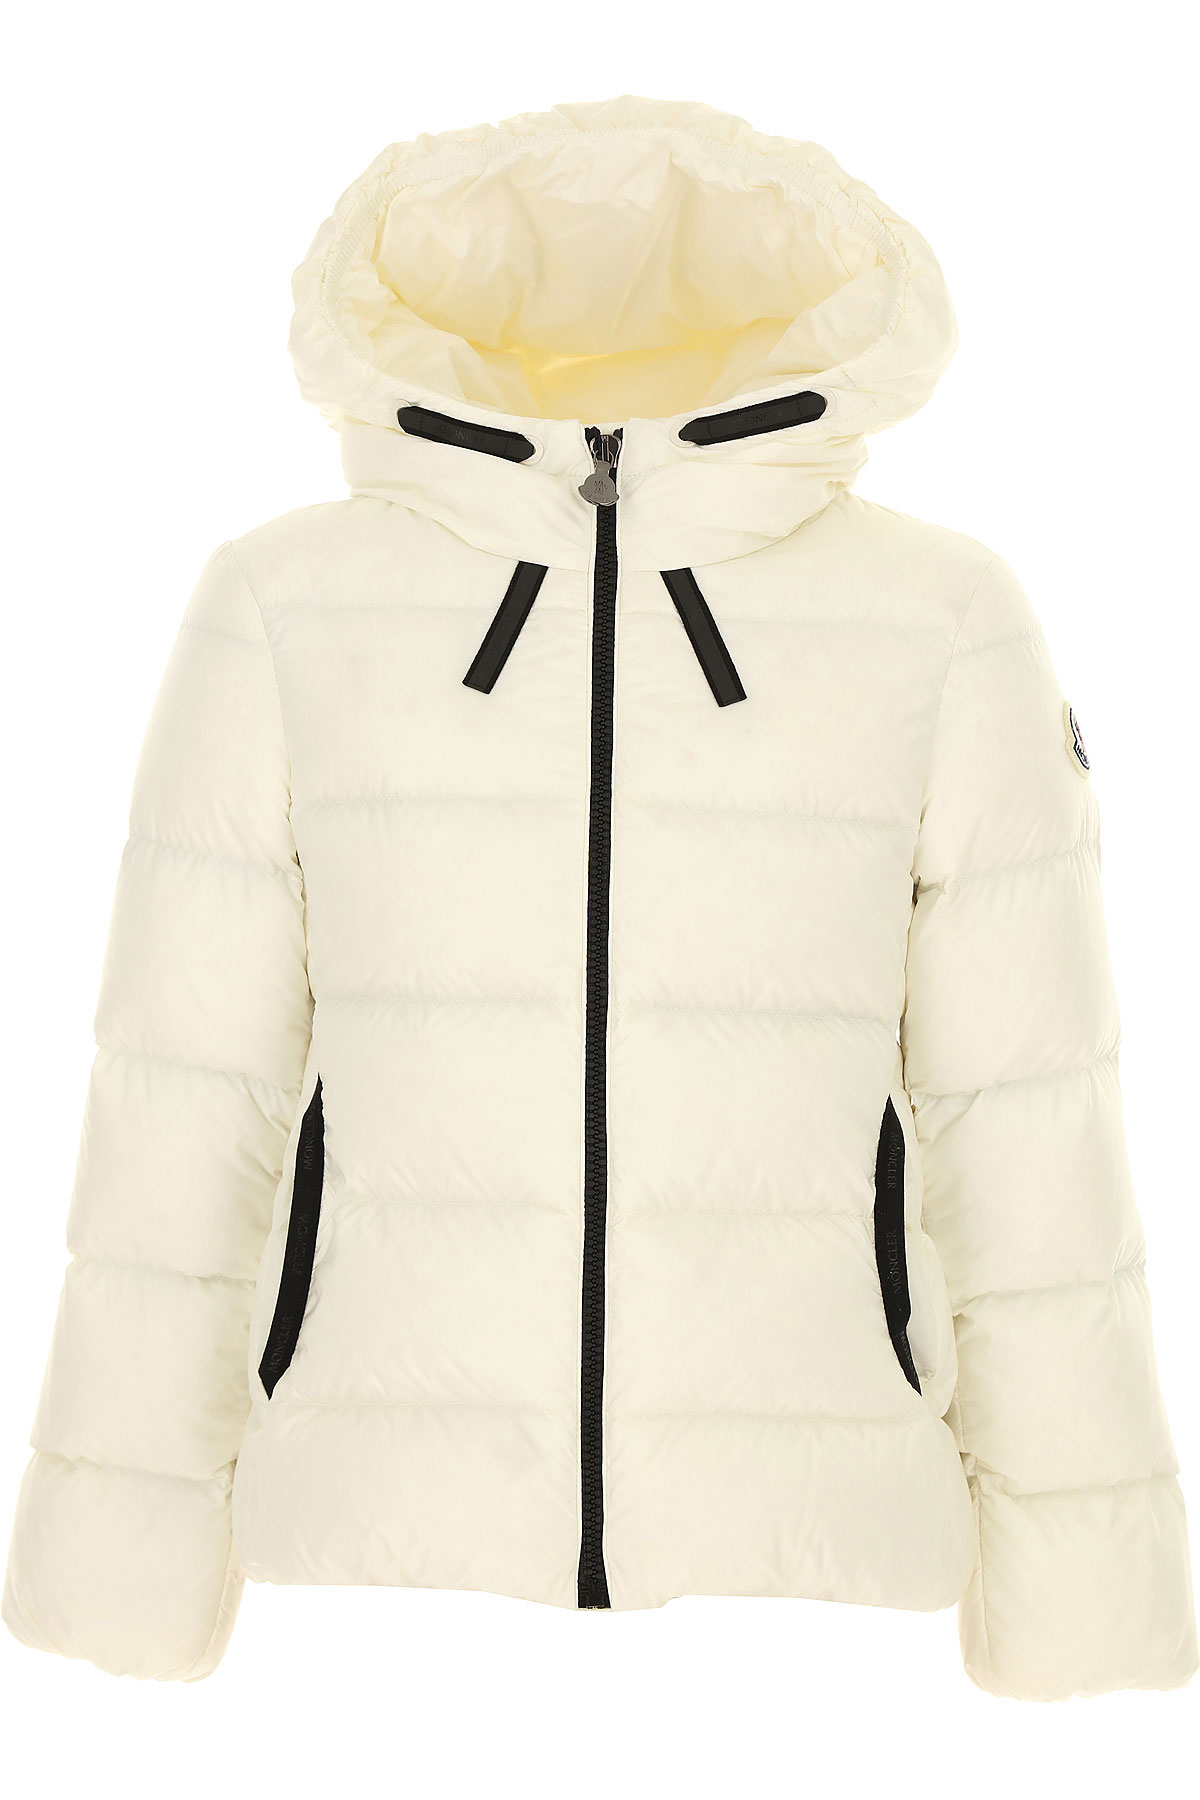 Girls Clothing Moncler, Style code: 1a50g10-53048-034